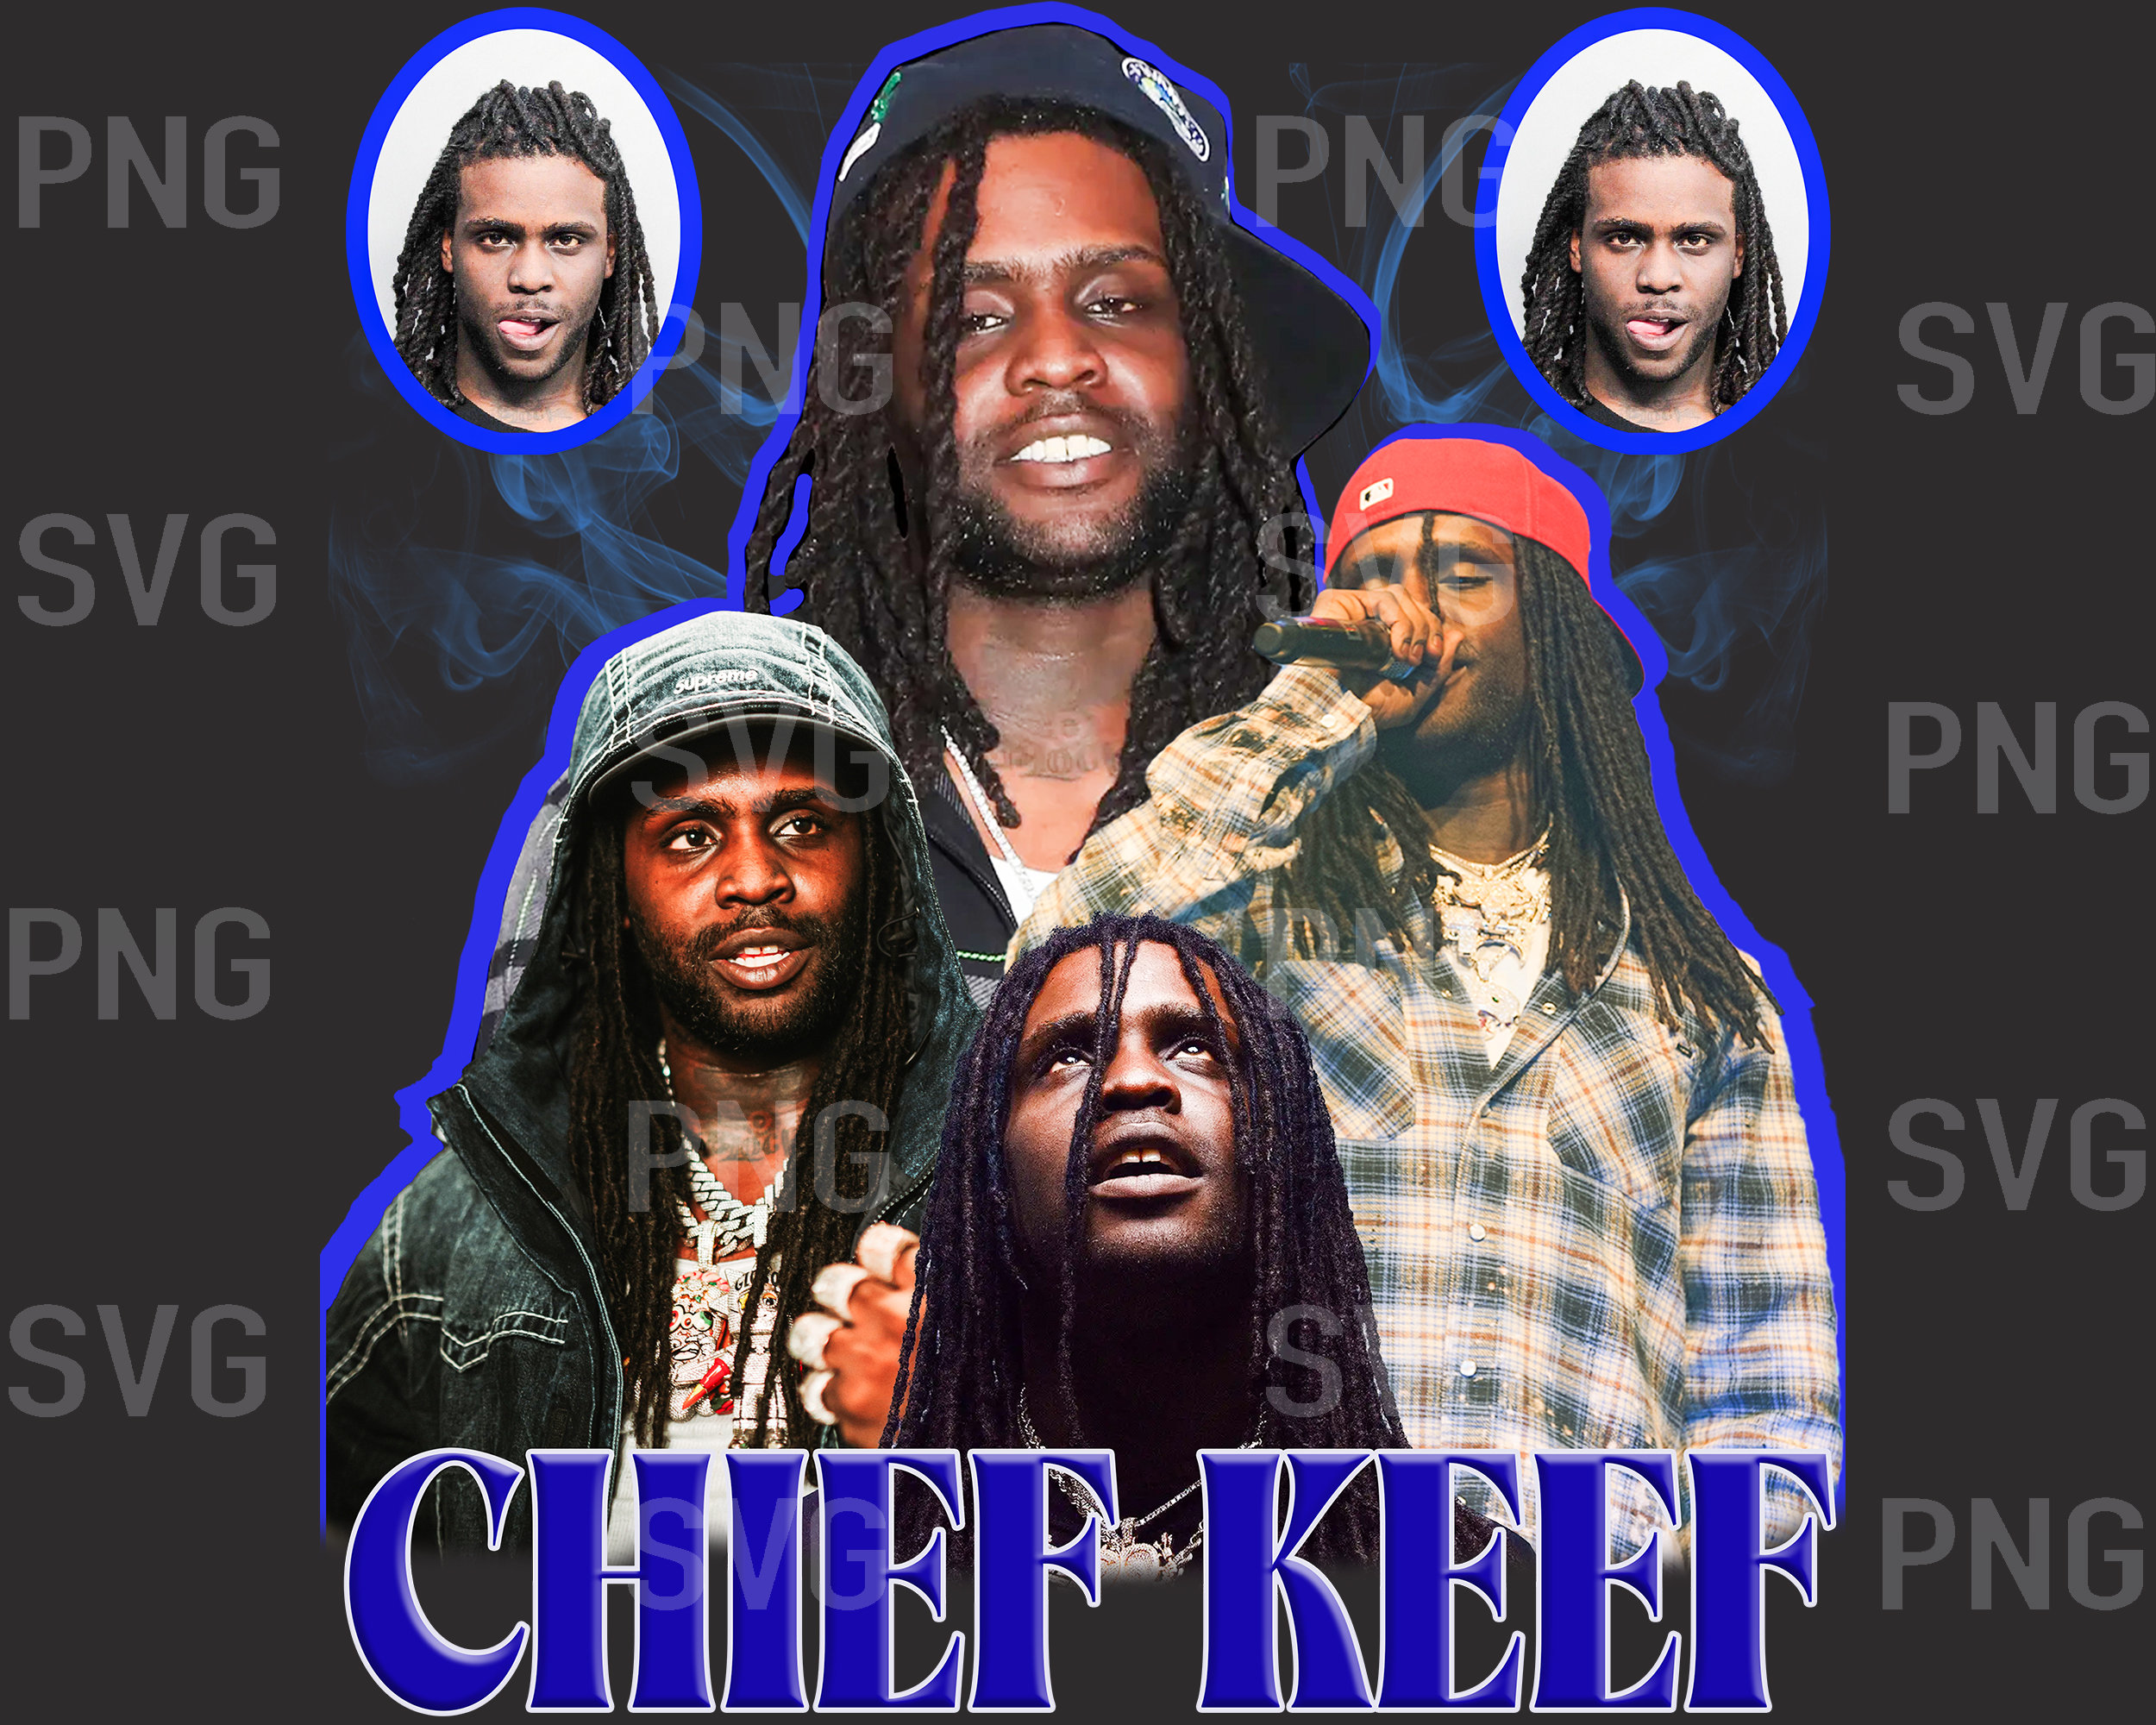 Download Chief Keef Wallpaper Free for Android  Chief Keef Wallpaper APK  Download  STEPrimocom